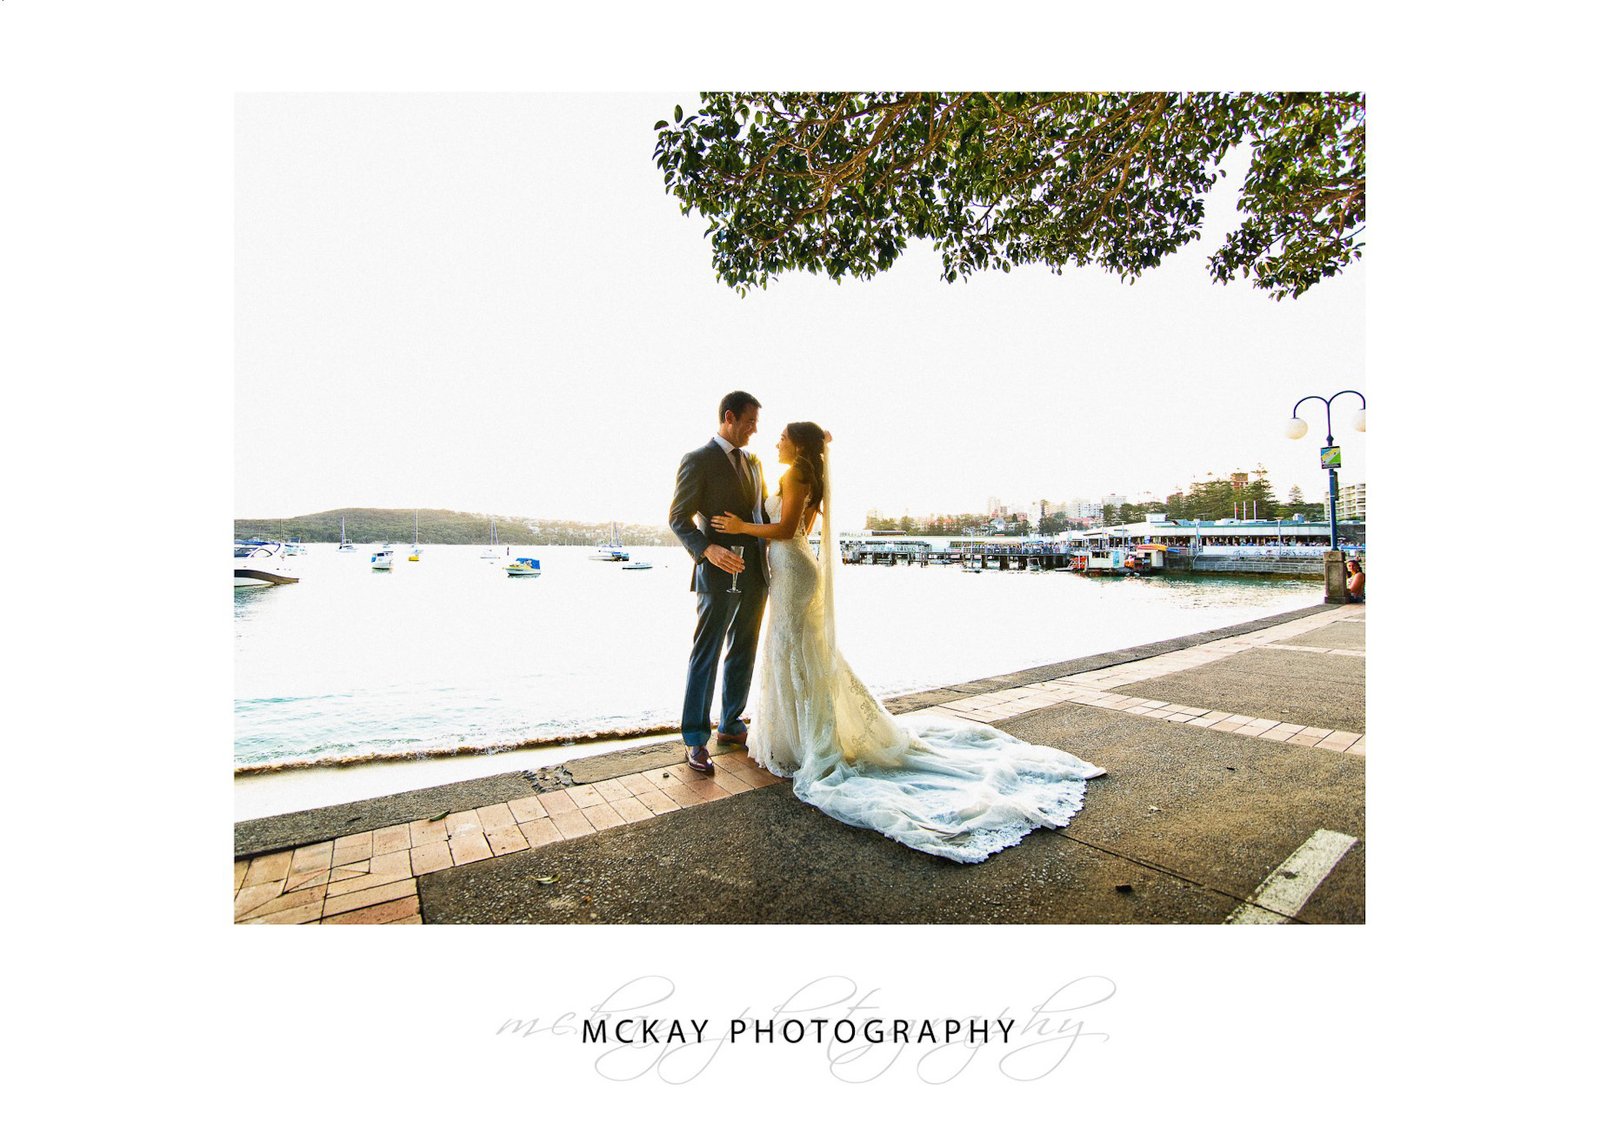 Manly Cove wedding photo backlit sunlight